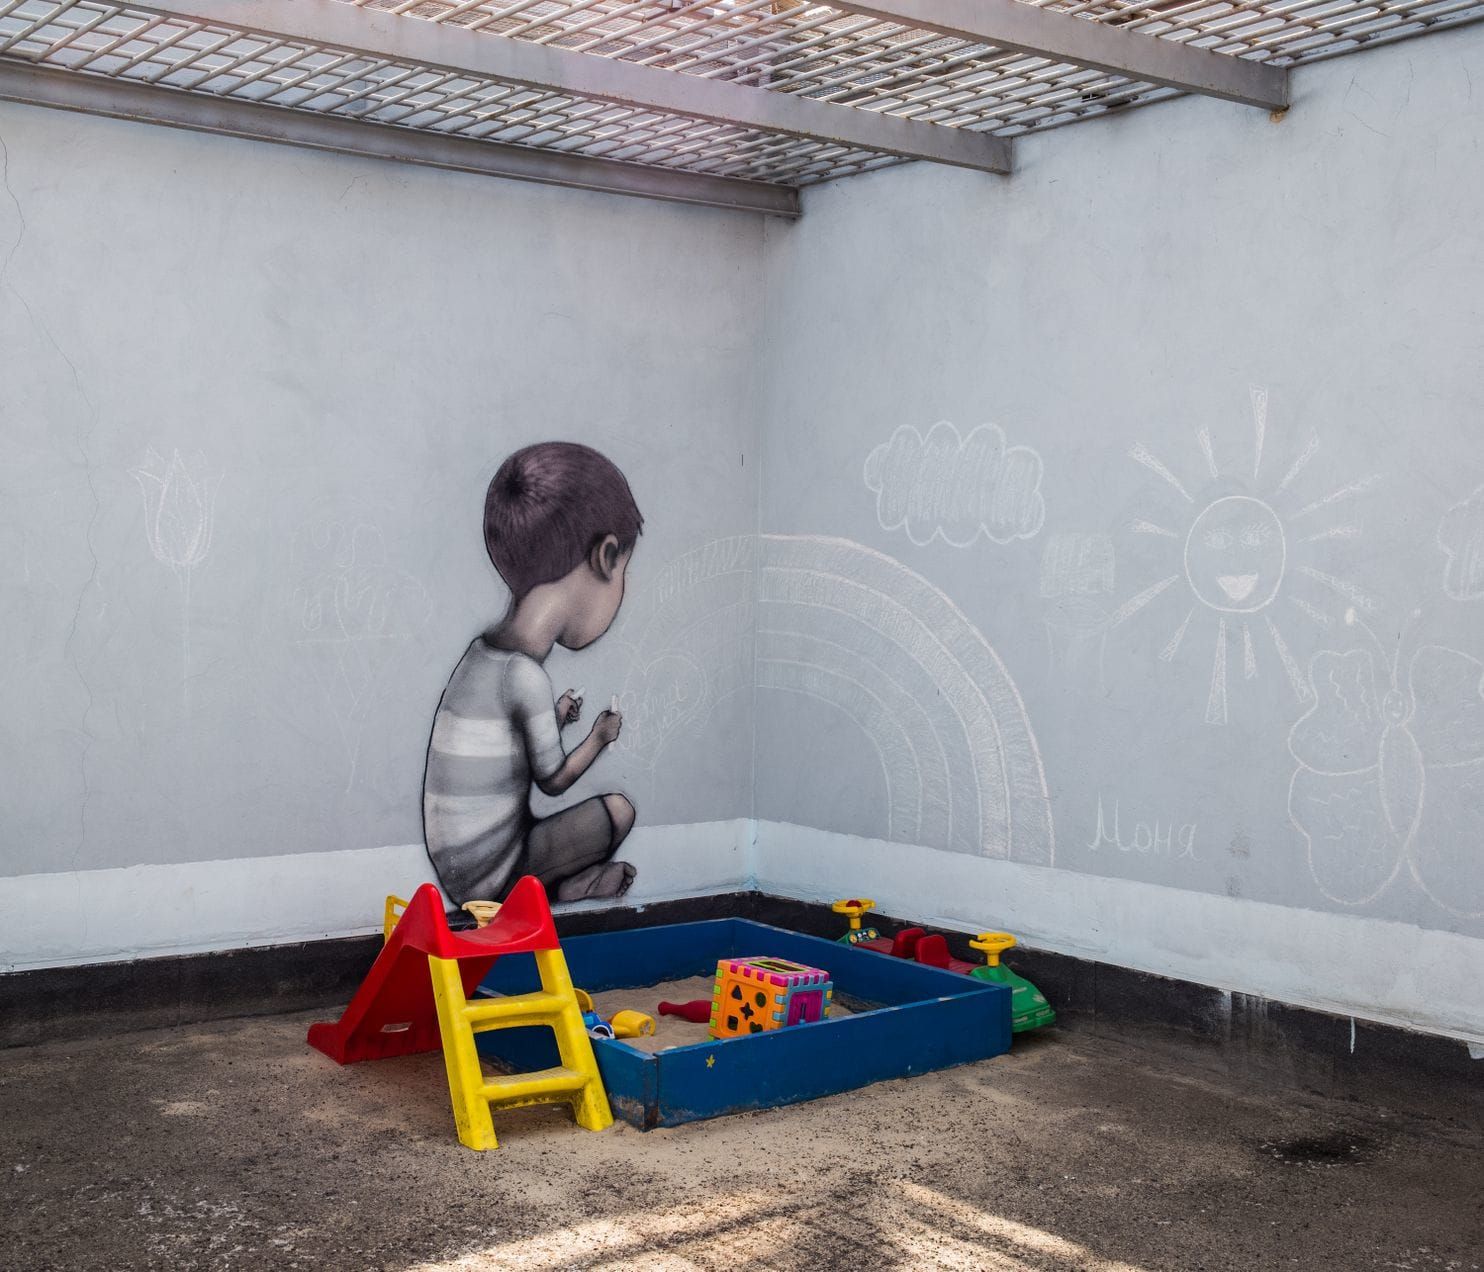 Courtyard for women with toddlers, pre-trial detention center in Kiev. Image by Misha Friedman. Ukraine, 2019.